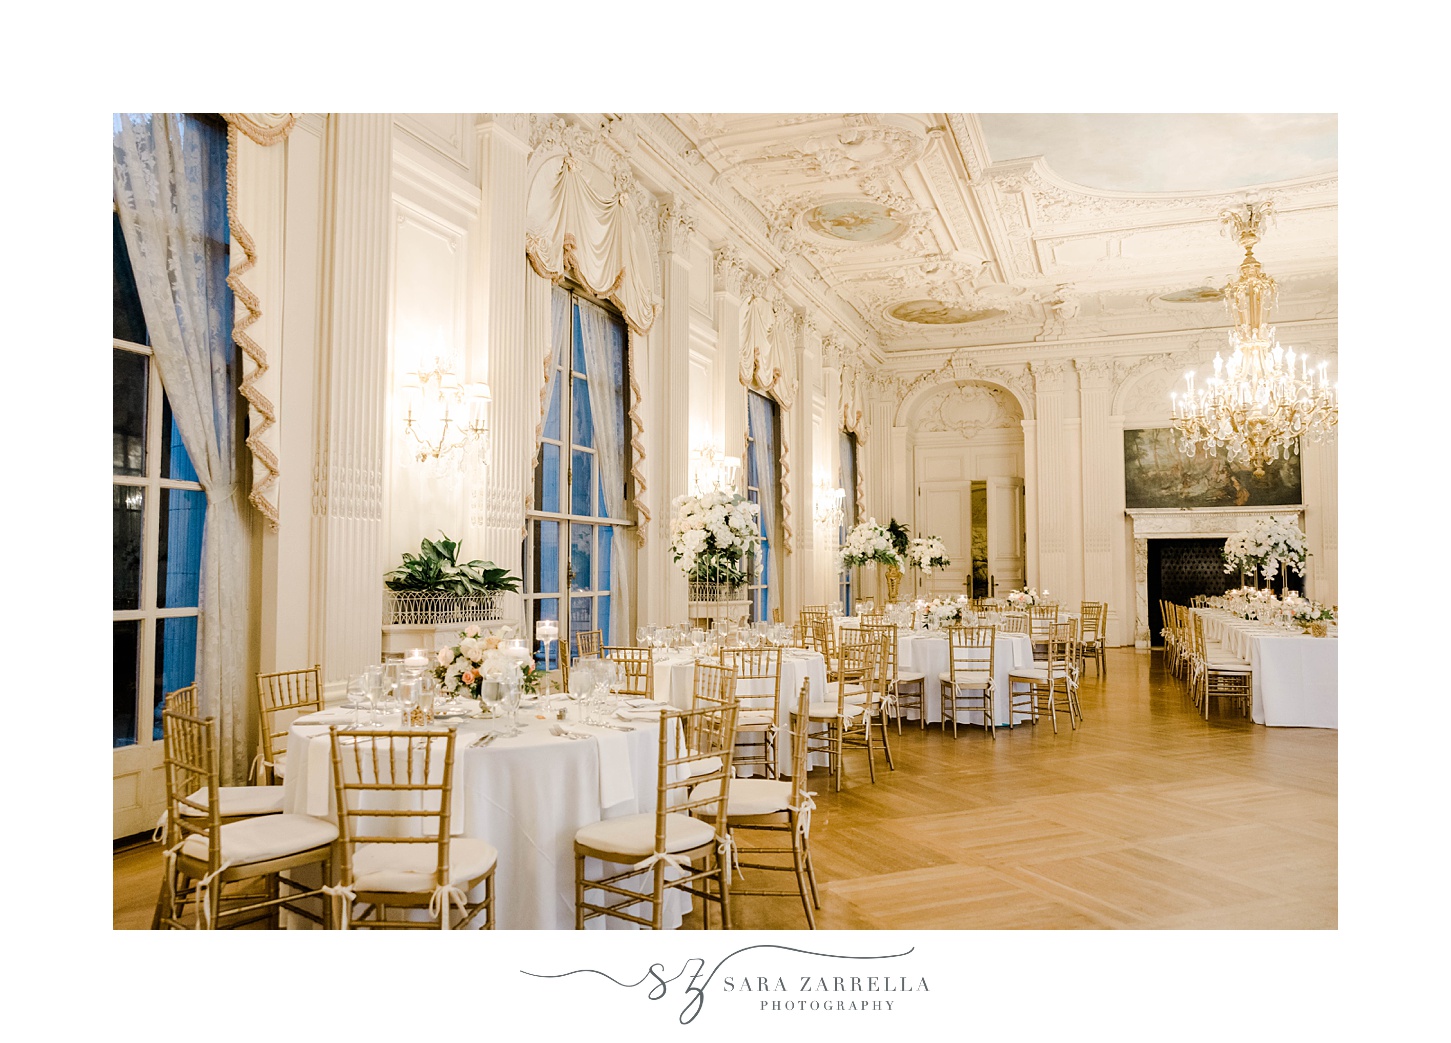 Rosecliff Mansion wedding reception with gold and white details